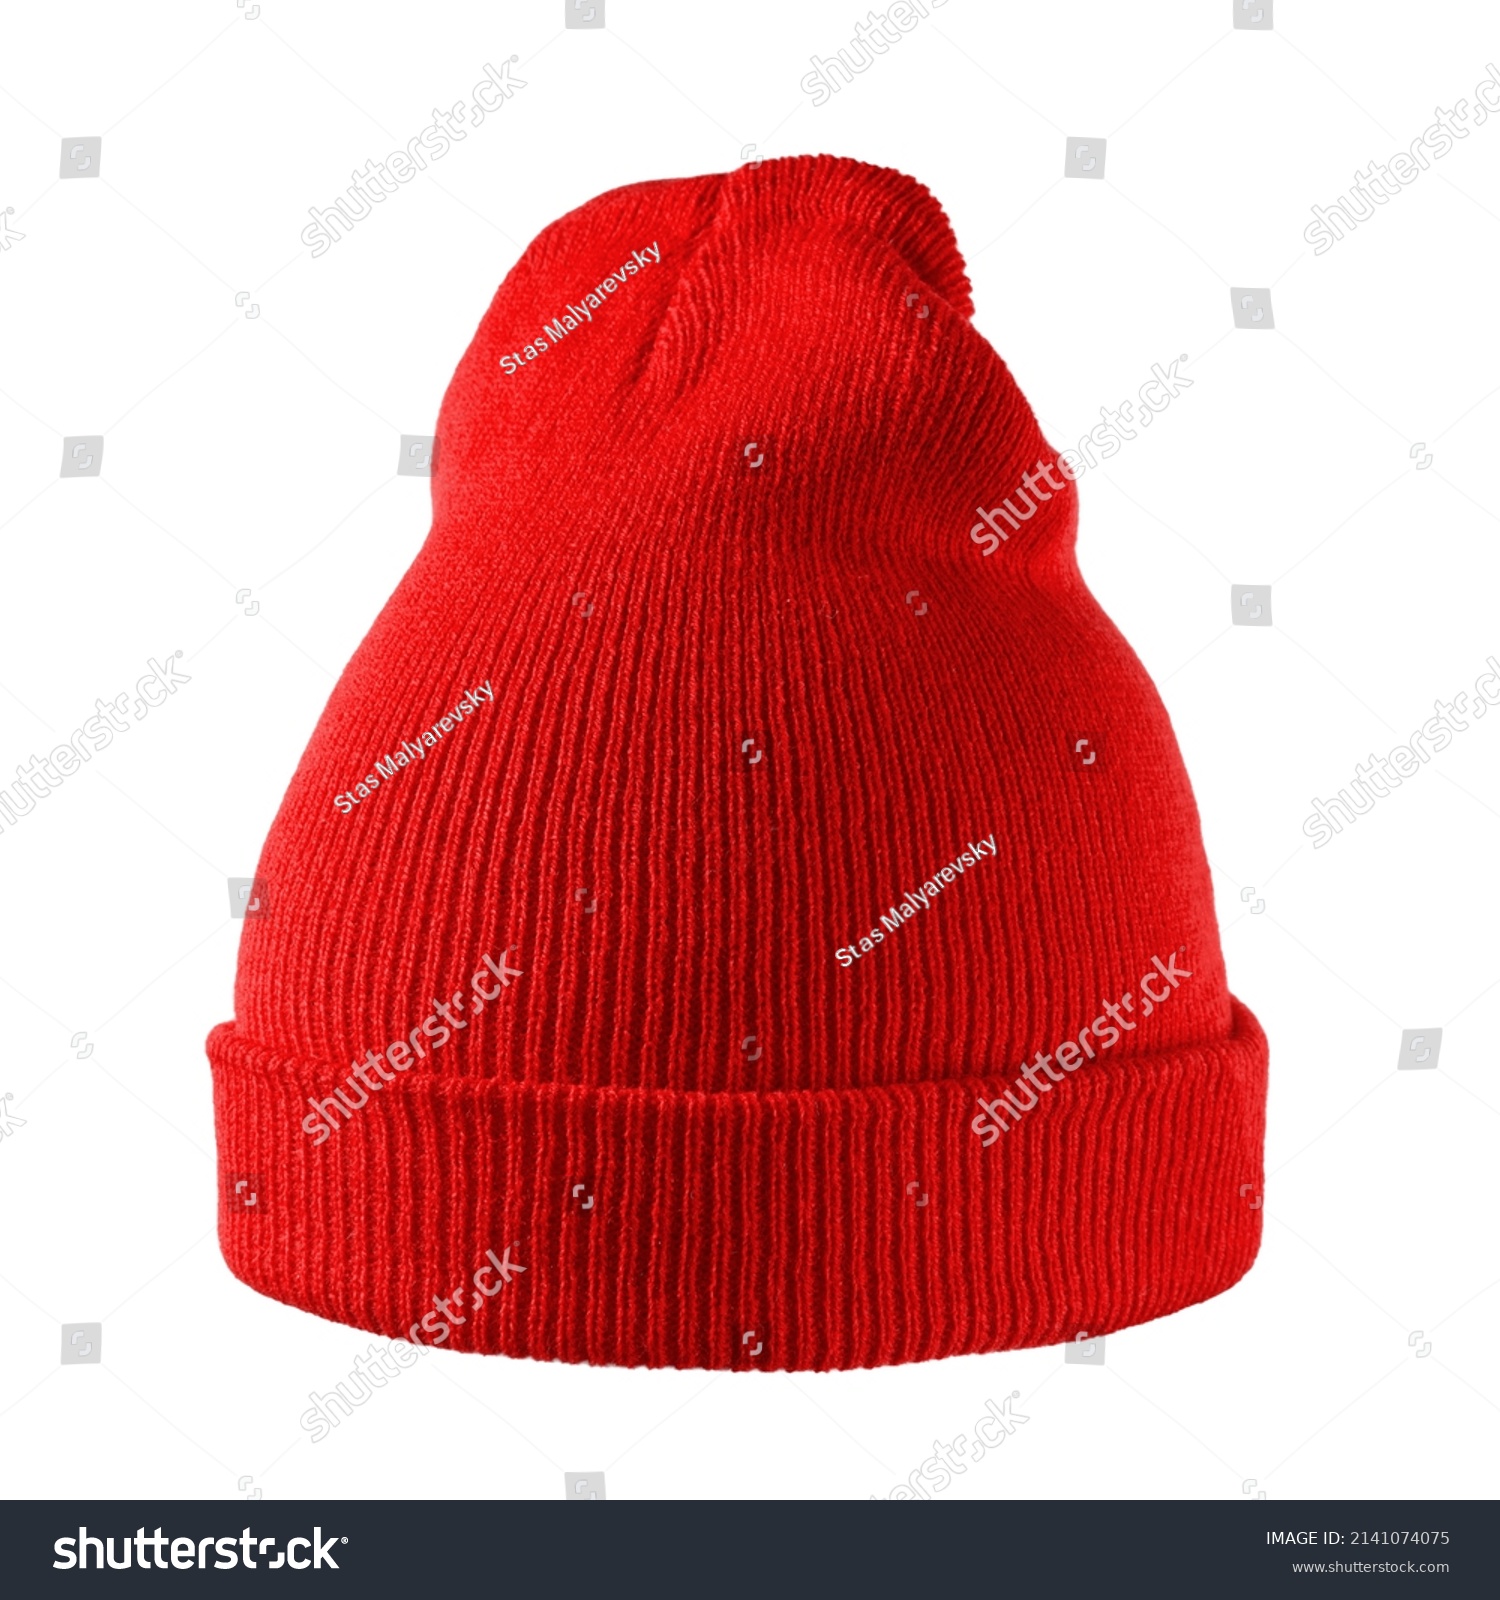 Red wool hat isolated on white background. knitted hat isolated on white background. Wool beanie variant, winter beanie hat. various styles of beanie hats isolate white background.  #2141074075